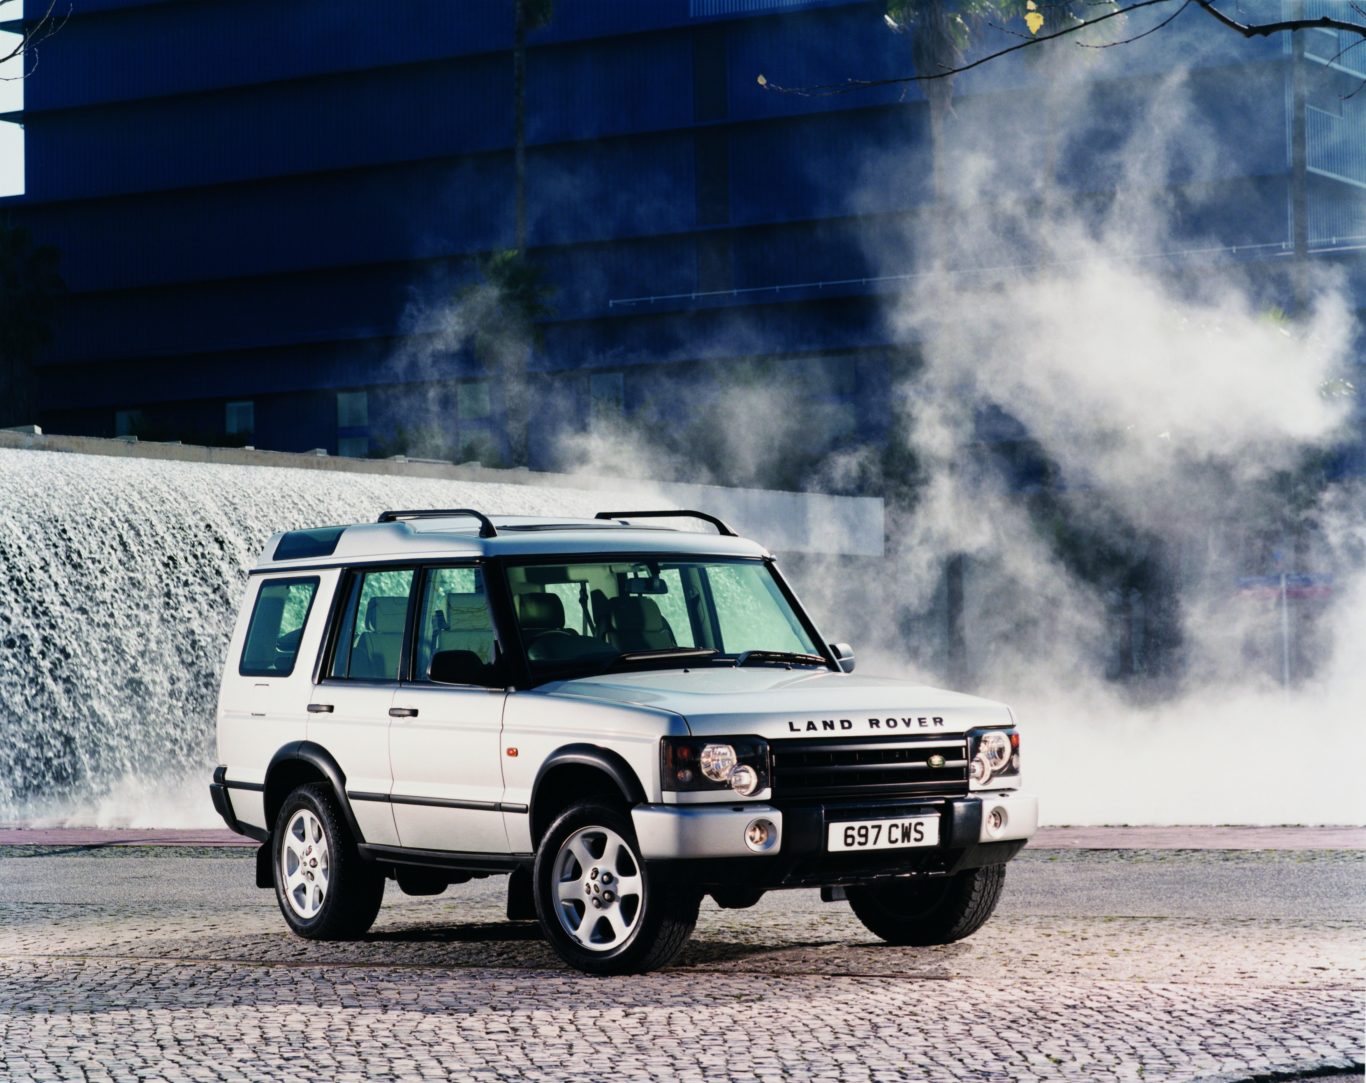 Ленд ровер дискавери 2.5 дизель. Land Rover Discovery 2. Land Rover Discovery II 1998-2004. Land Rover Discovery II (1998). Ленд Ровер Дискавери 2004.